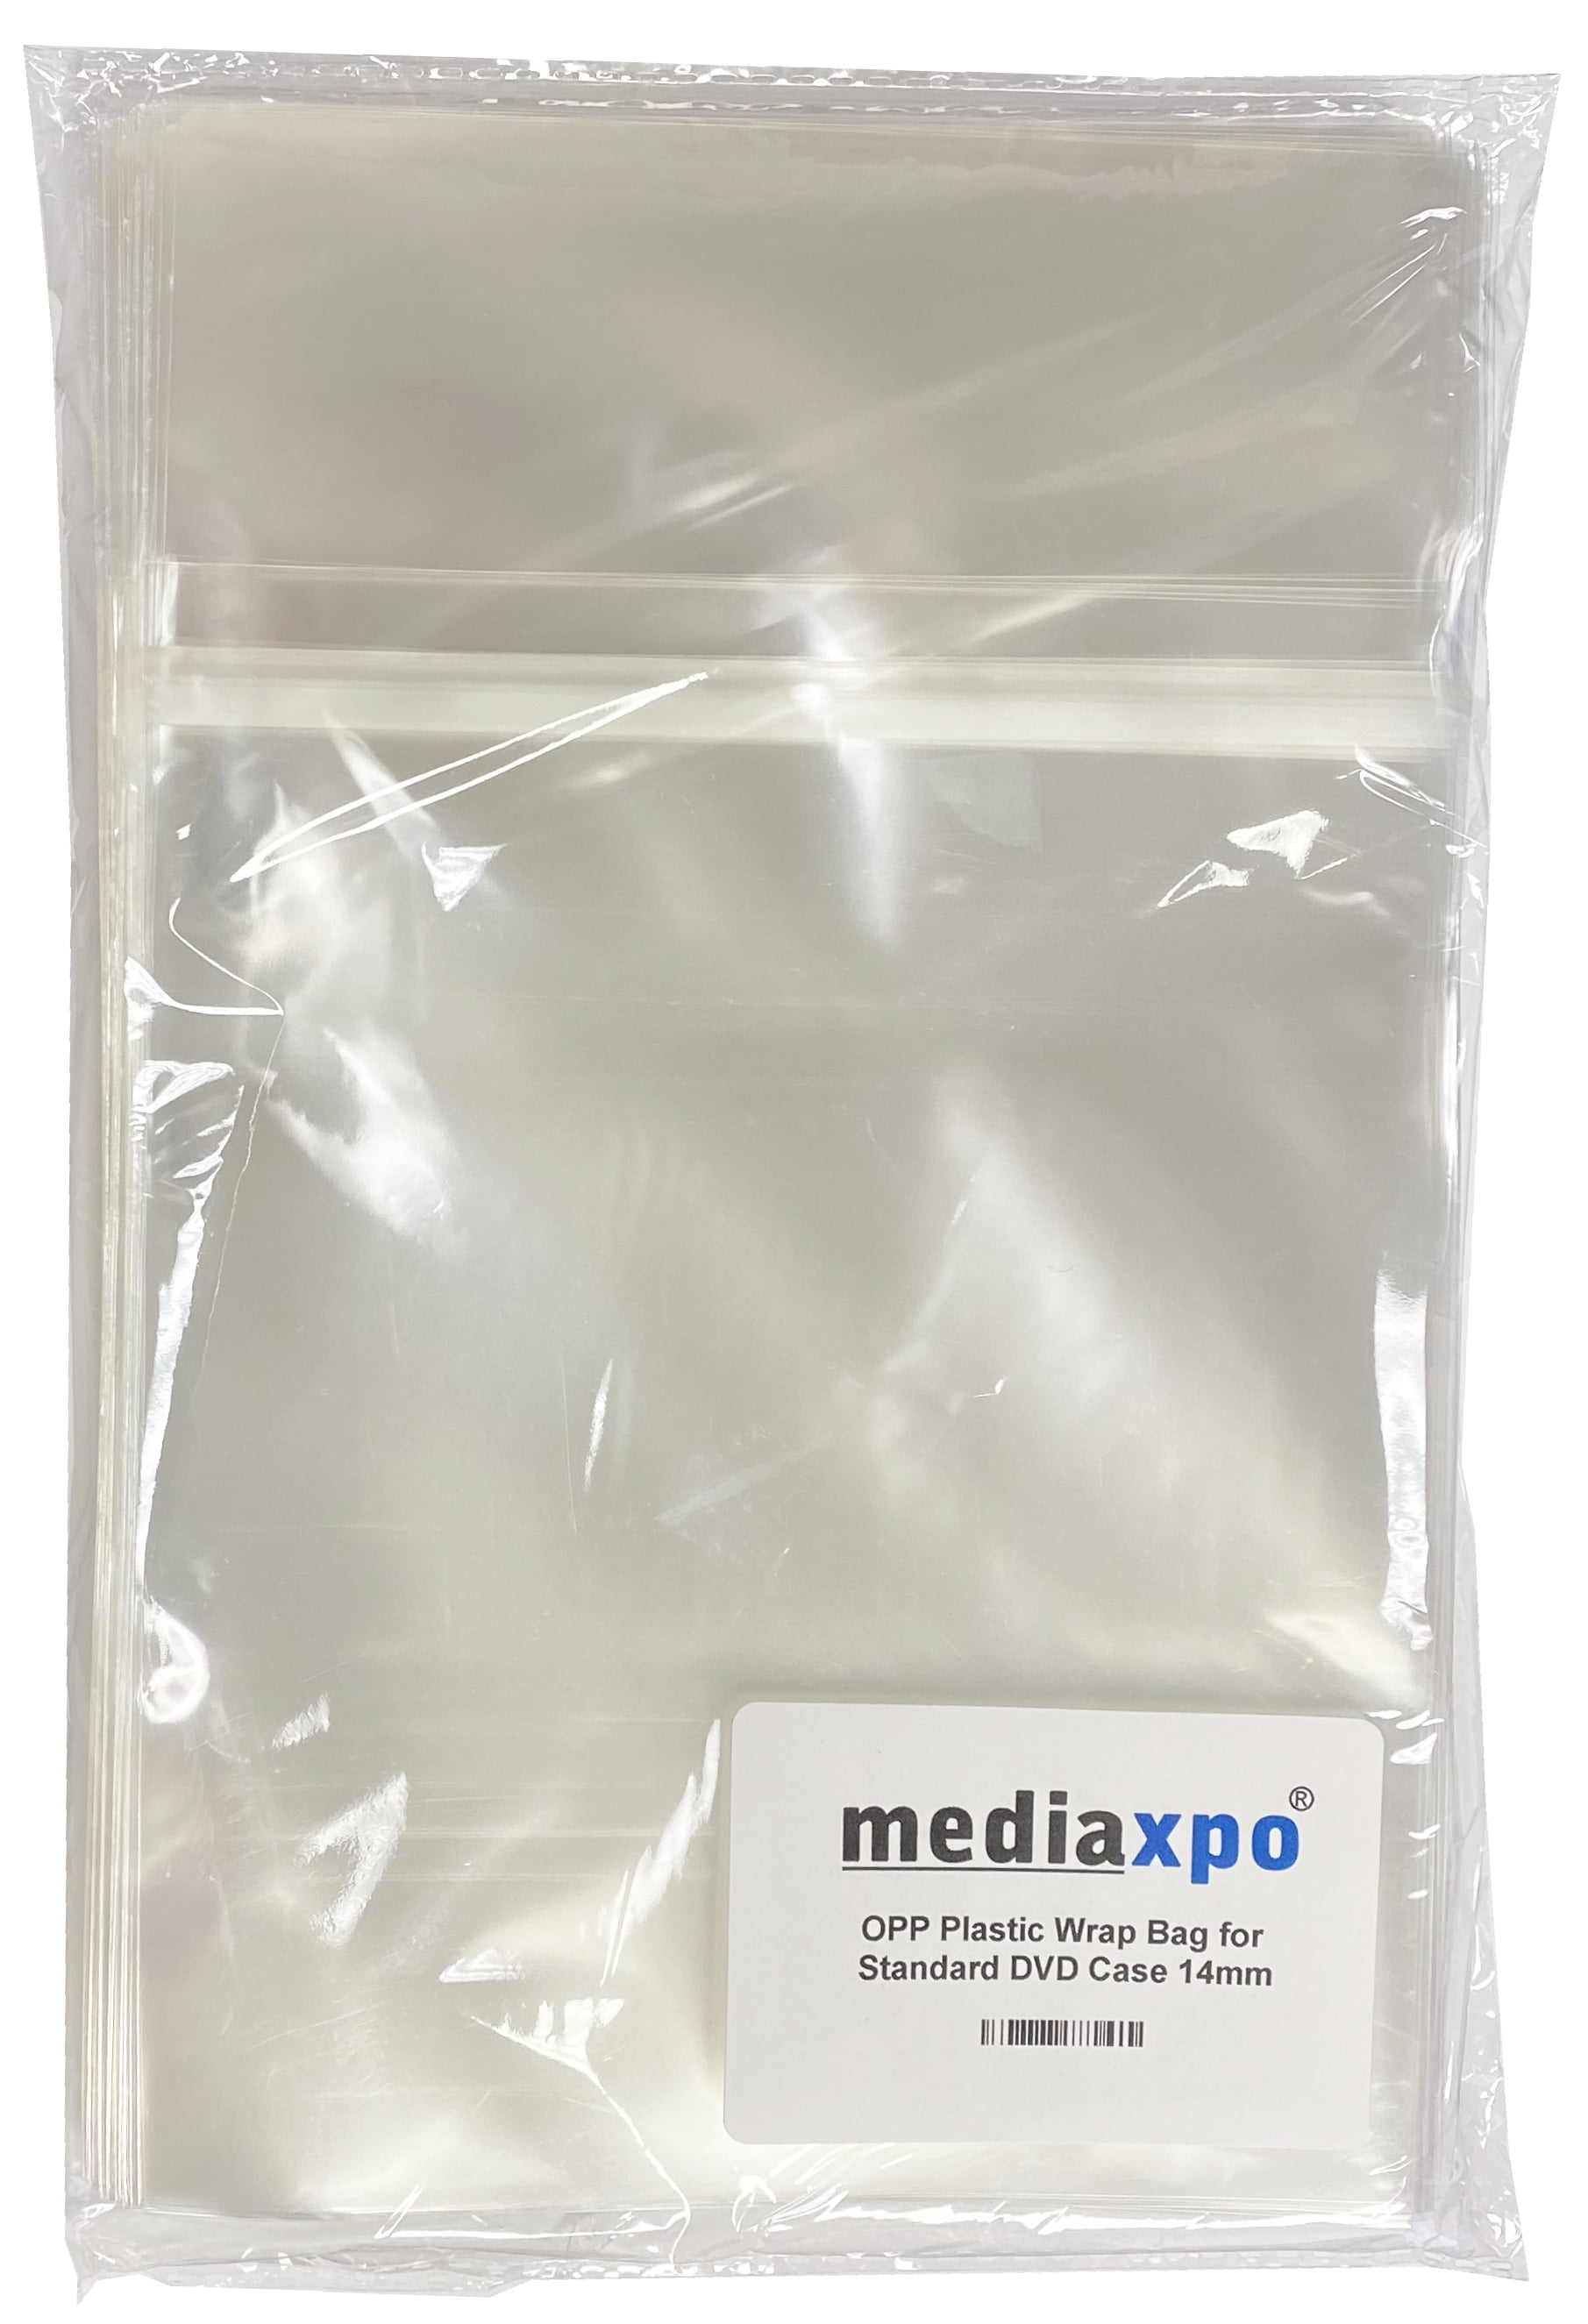 NEW 200 OPP Resealable Plastic Wrap Bags for Standard 10.4mm CD Jewel Case 